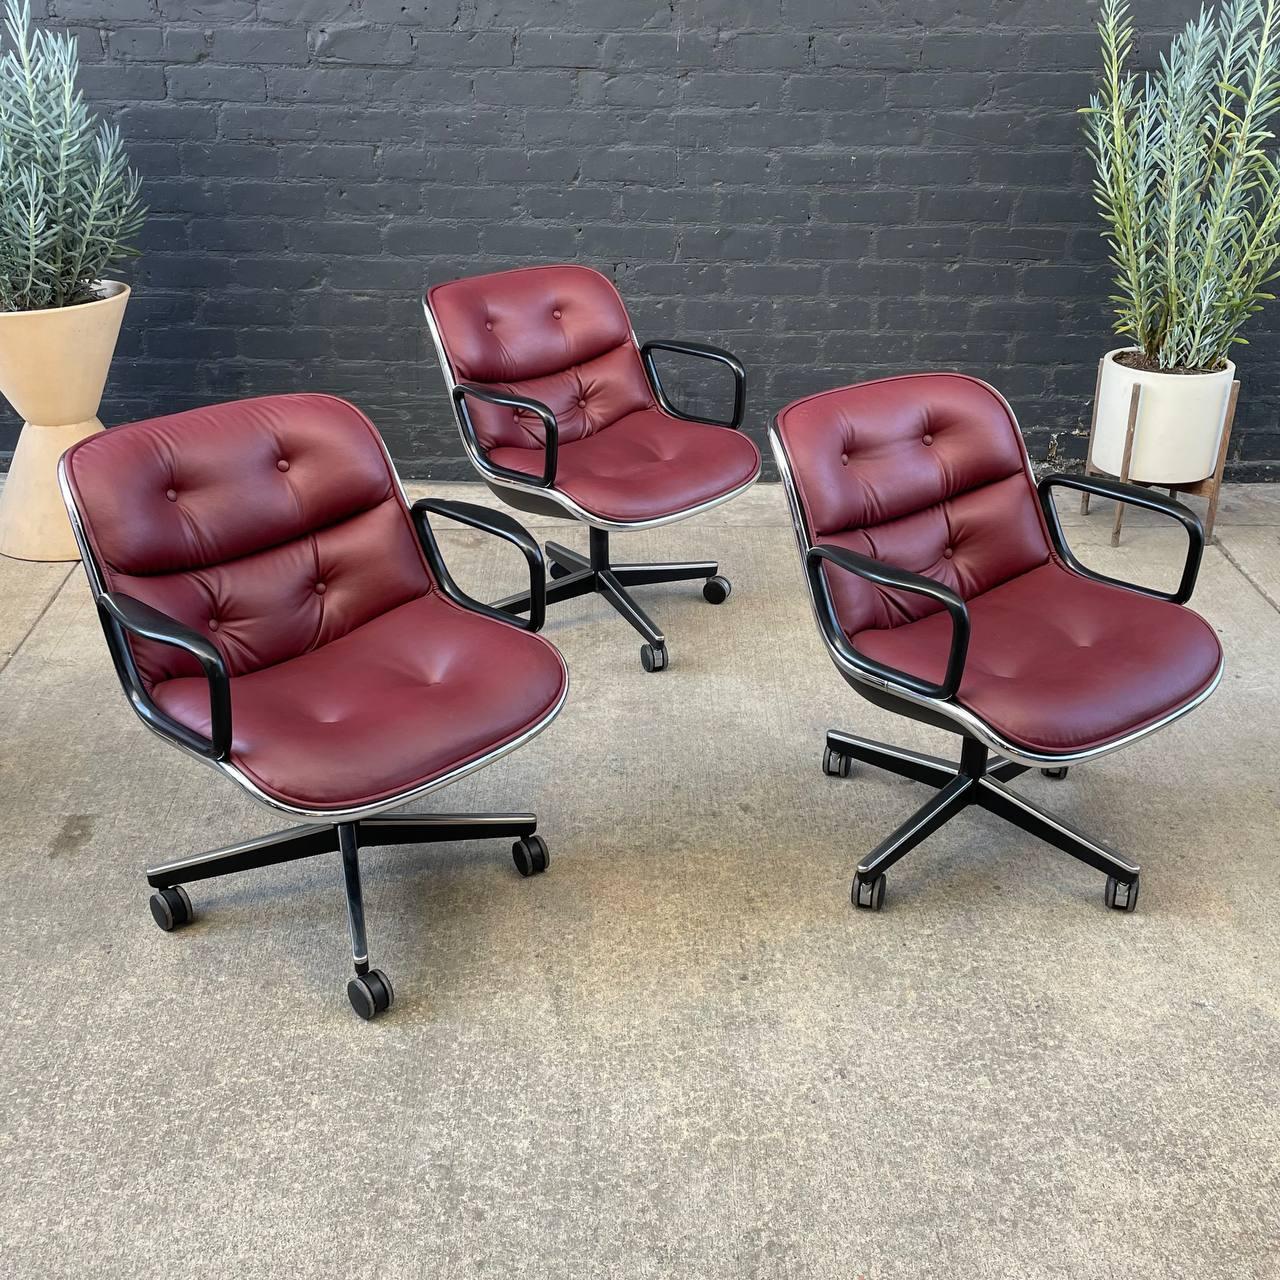 Mid-Century Modern Set of 4 Charles Pollock for Knoll Leather Executive Desk Chair’s